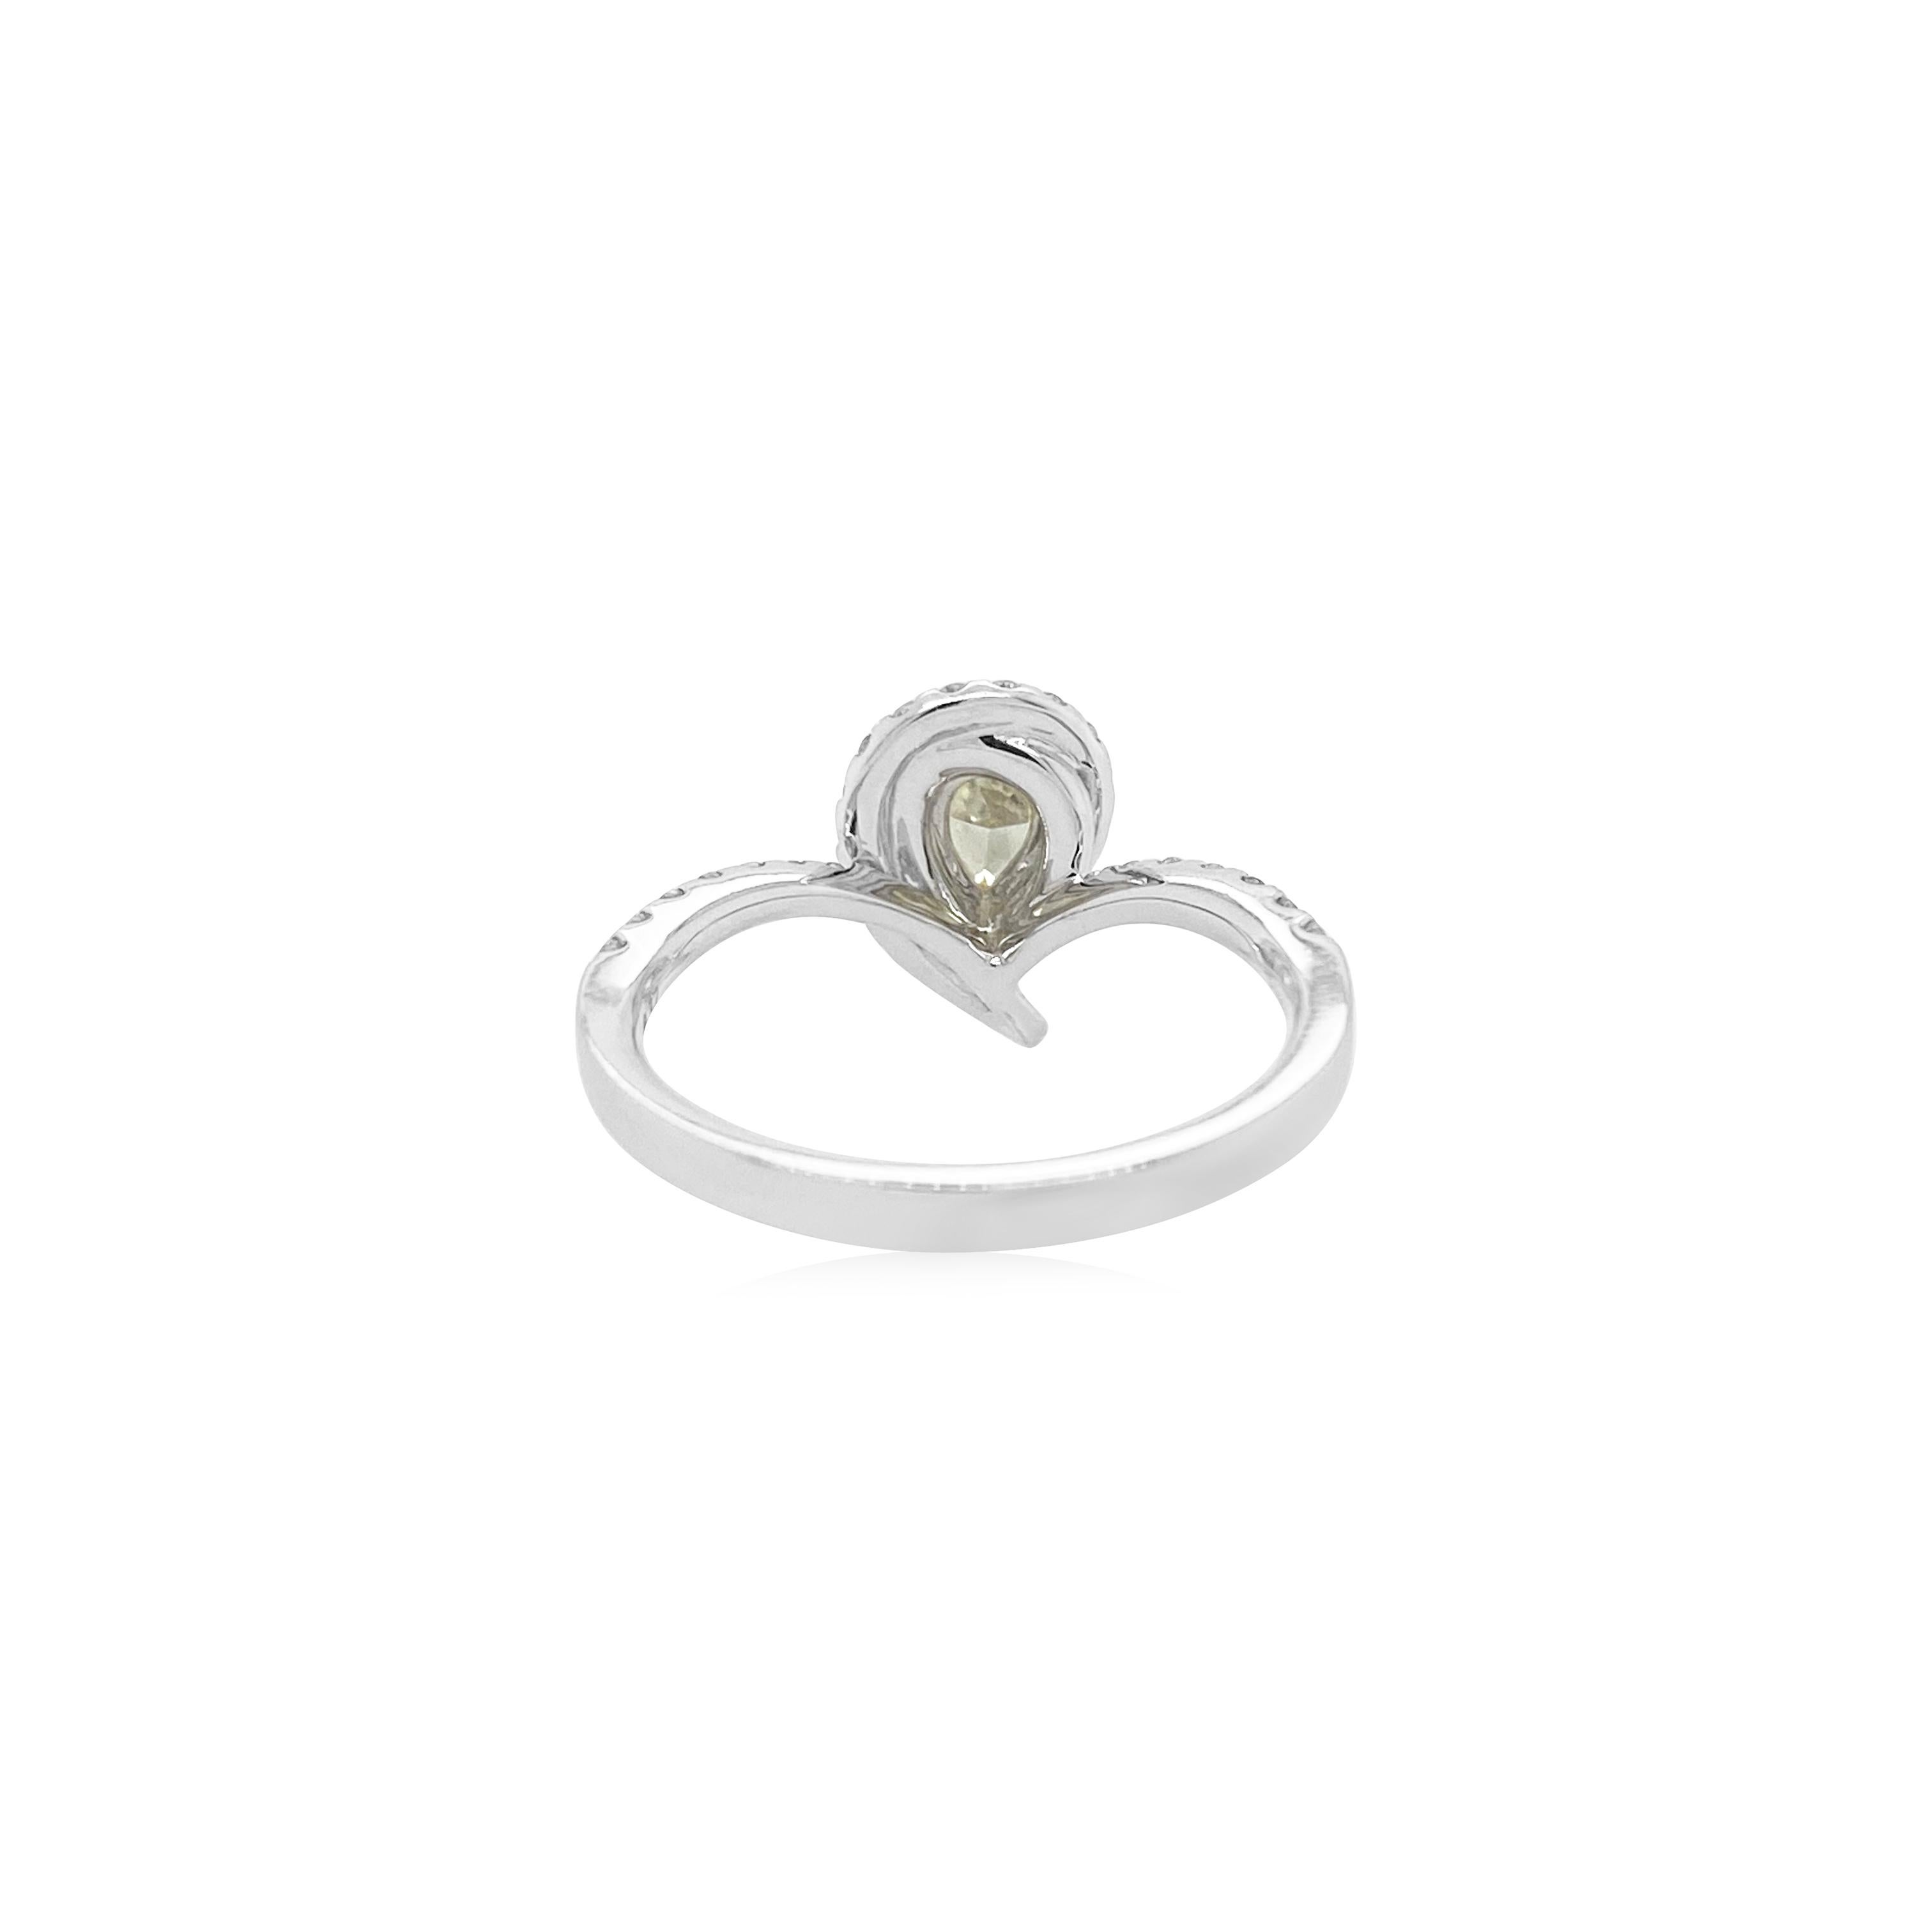 Unique and gorgeous Intense Yellow pear shape Diamond ring. The radiance of diamond is enhanced by scintillating brilliant cut white diamonds.

-	Centre Diamond is CGL Lab Certified Fancy Intense Yellow diamond – 0.313 ct
-	Round Brilliant Cut White